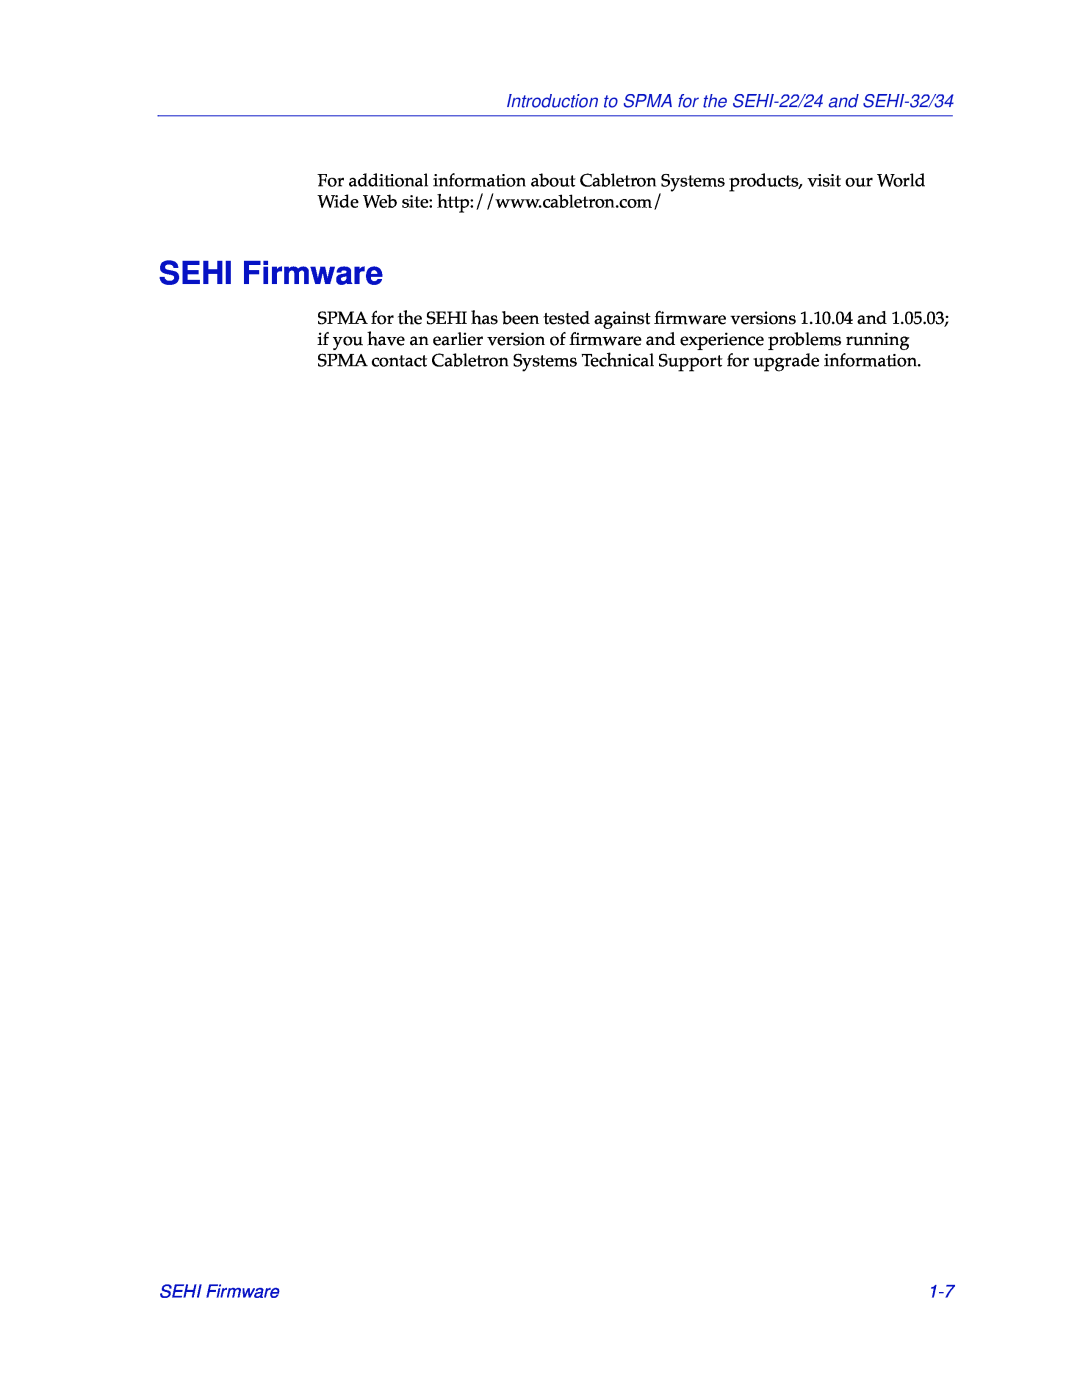 Cabletron Systems manual SEHI Firmware, Introduction to SPMA for the SEHI-22/24 and SEHI-32/34 